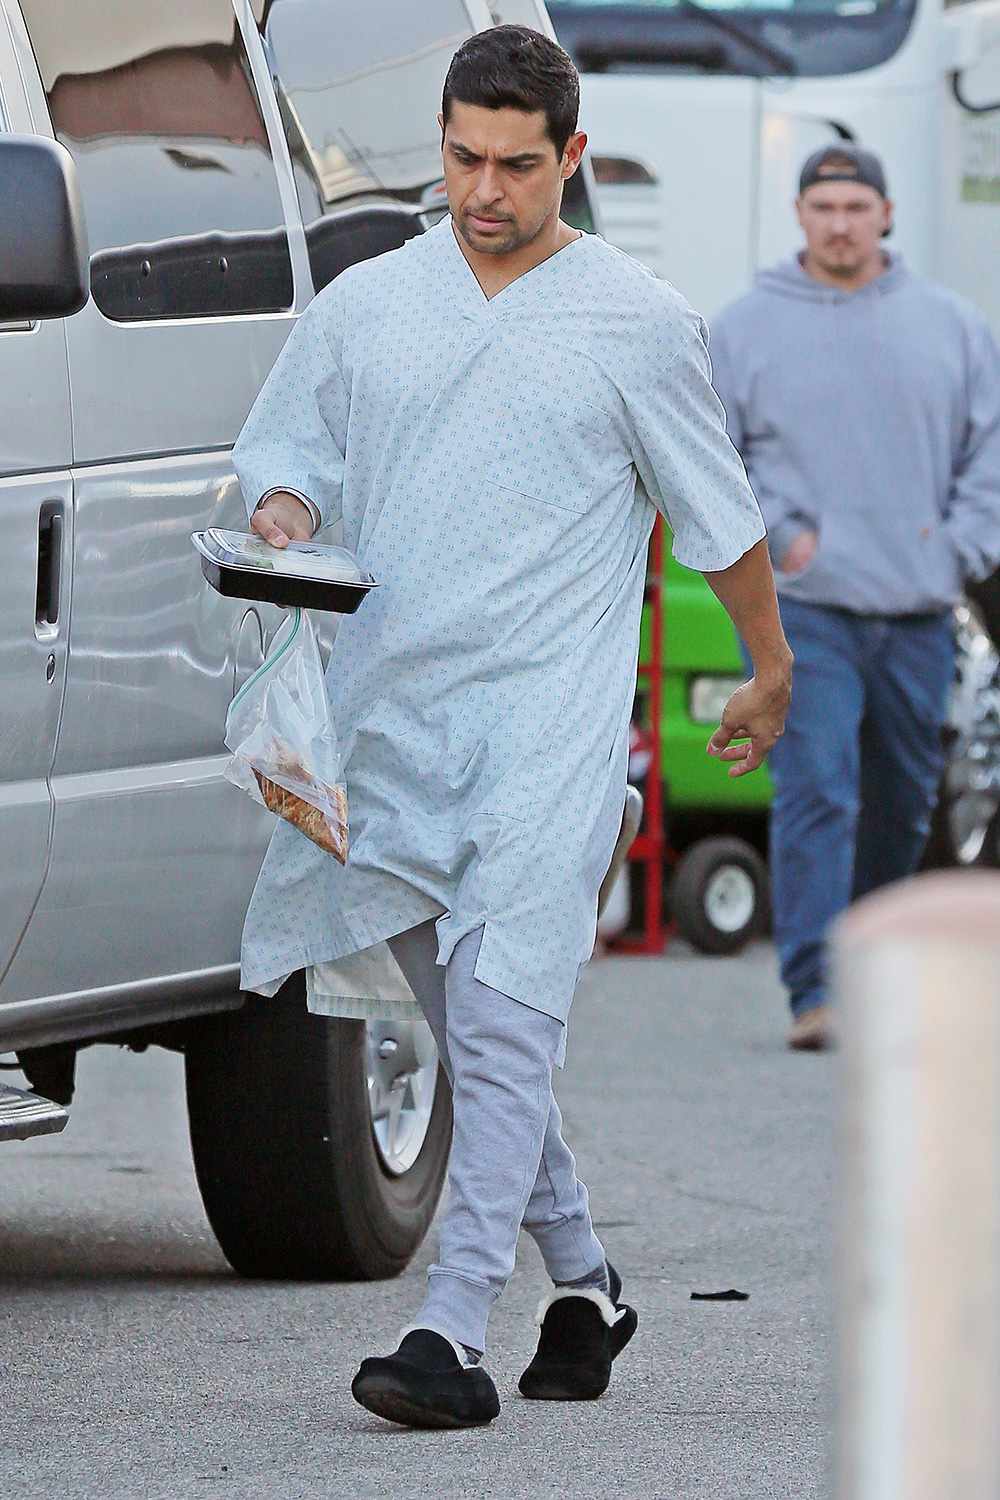 Wilmer Valderrama carried fried chicken while wearing a hospital patient gown as he walks around on the film set of NCIS in Los Angeles on Sunday